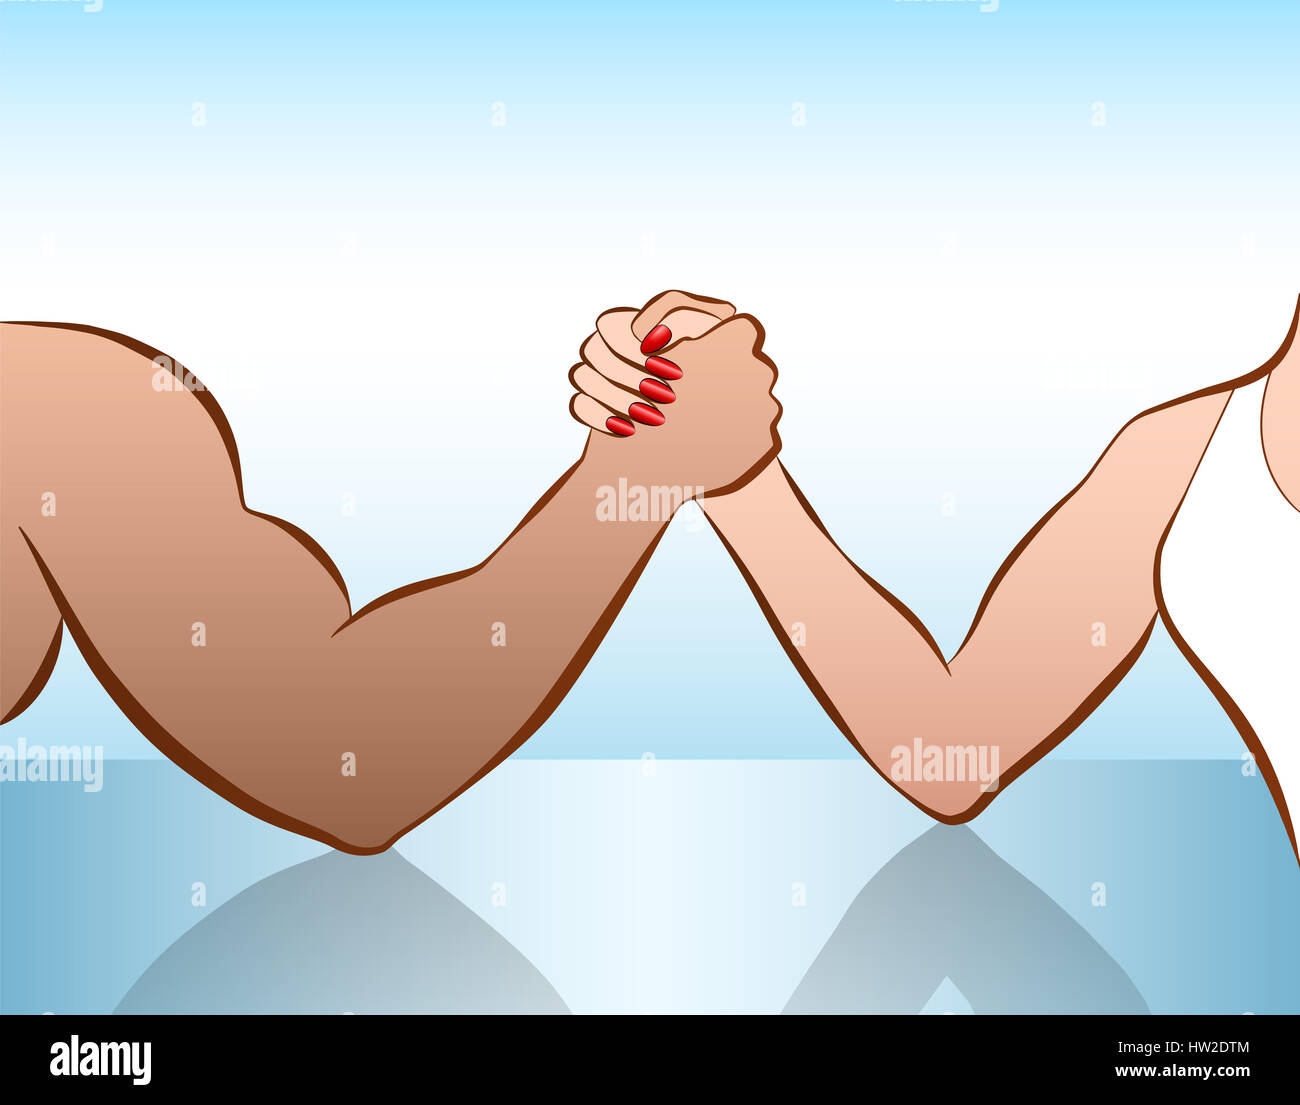 Man and woman arm wrestling of as a symbol for battle of the sexes or gender fight. Illustration on white background. Stock Photo